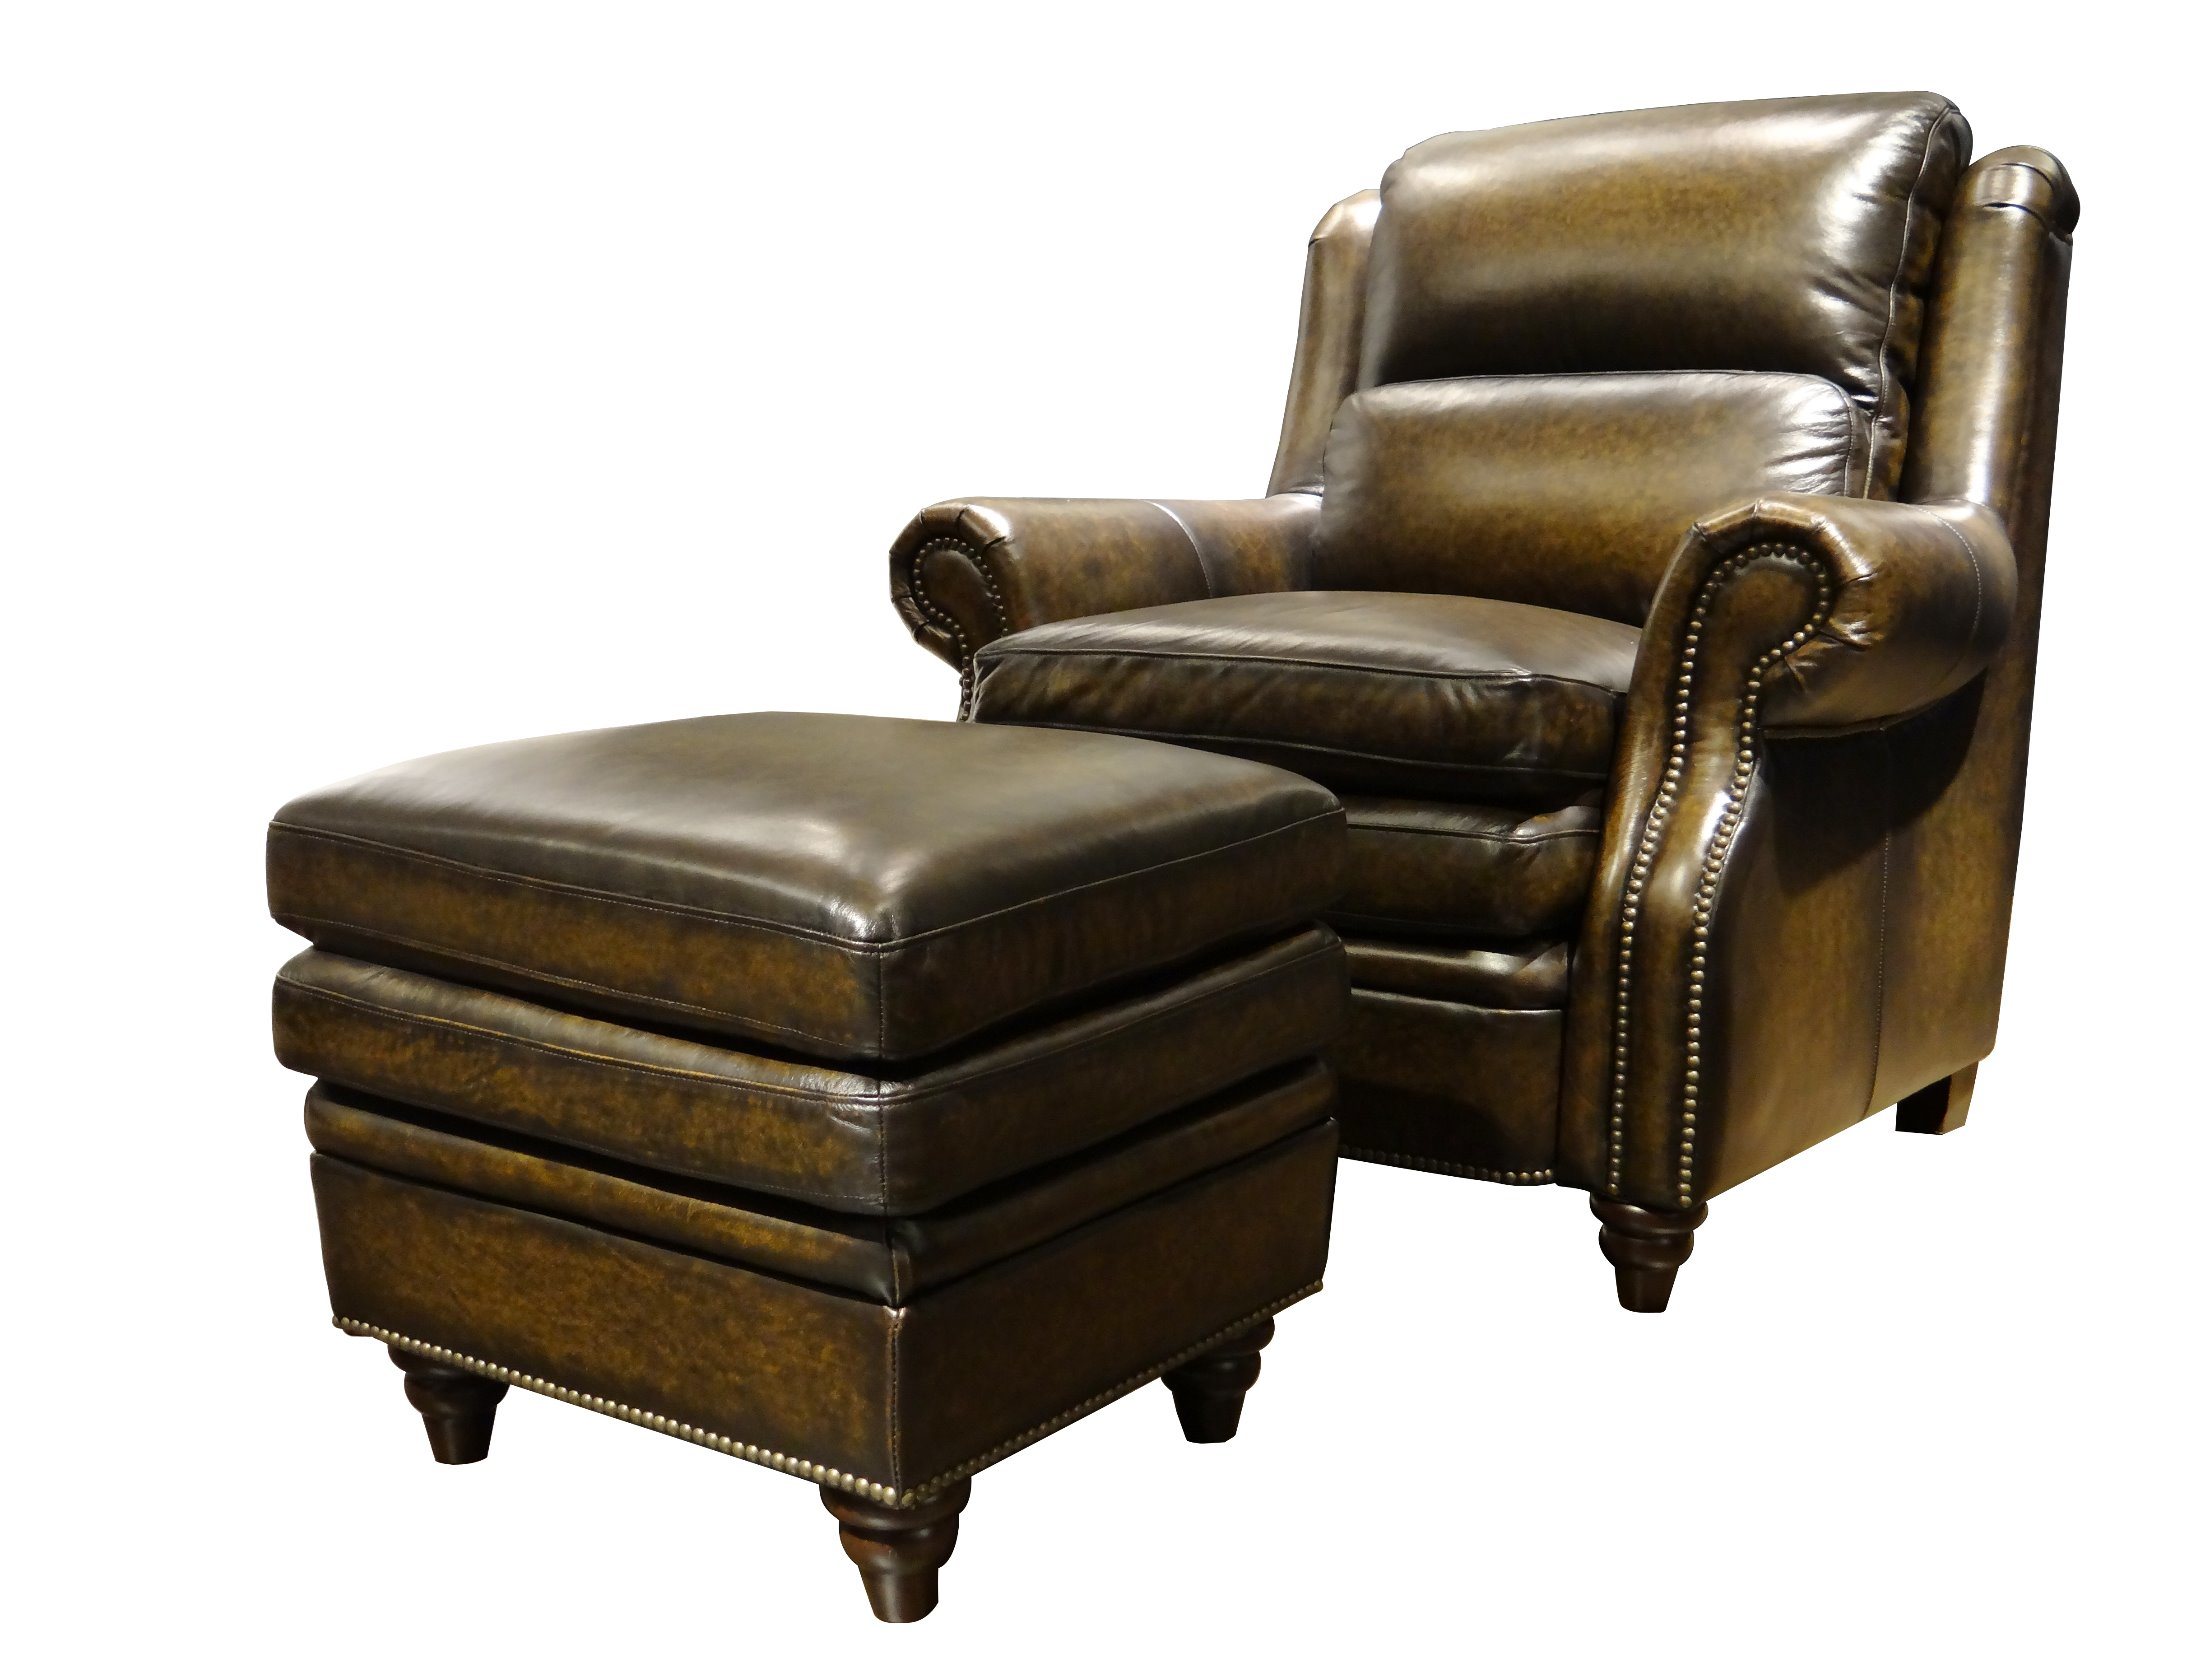 Tradtional American Living Room Leather Sofa